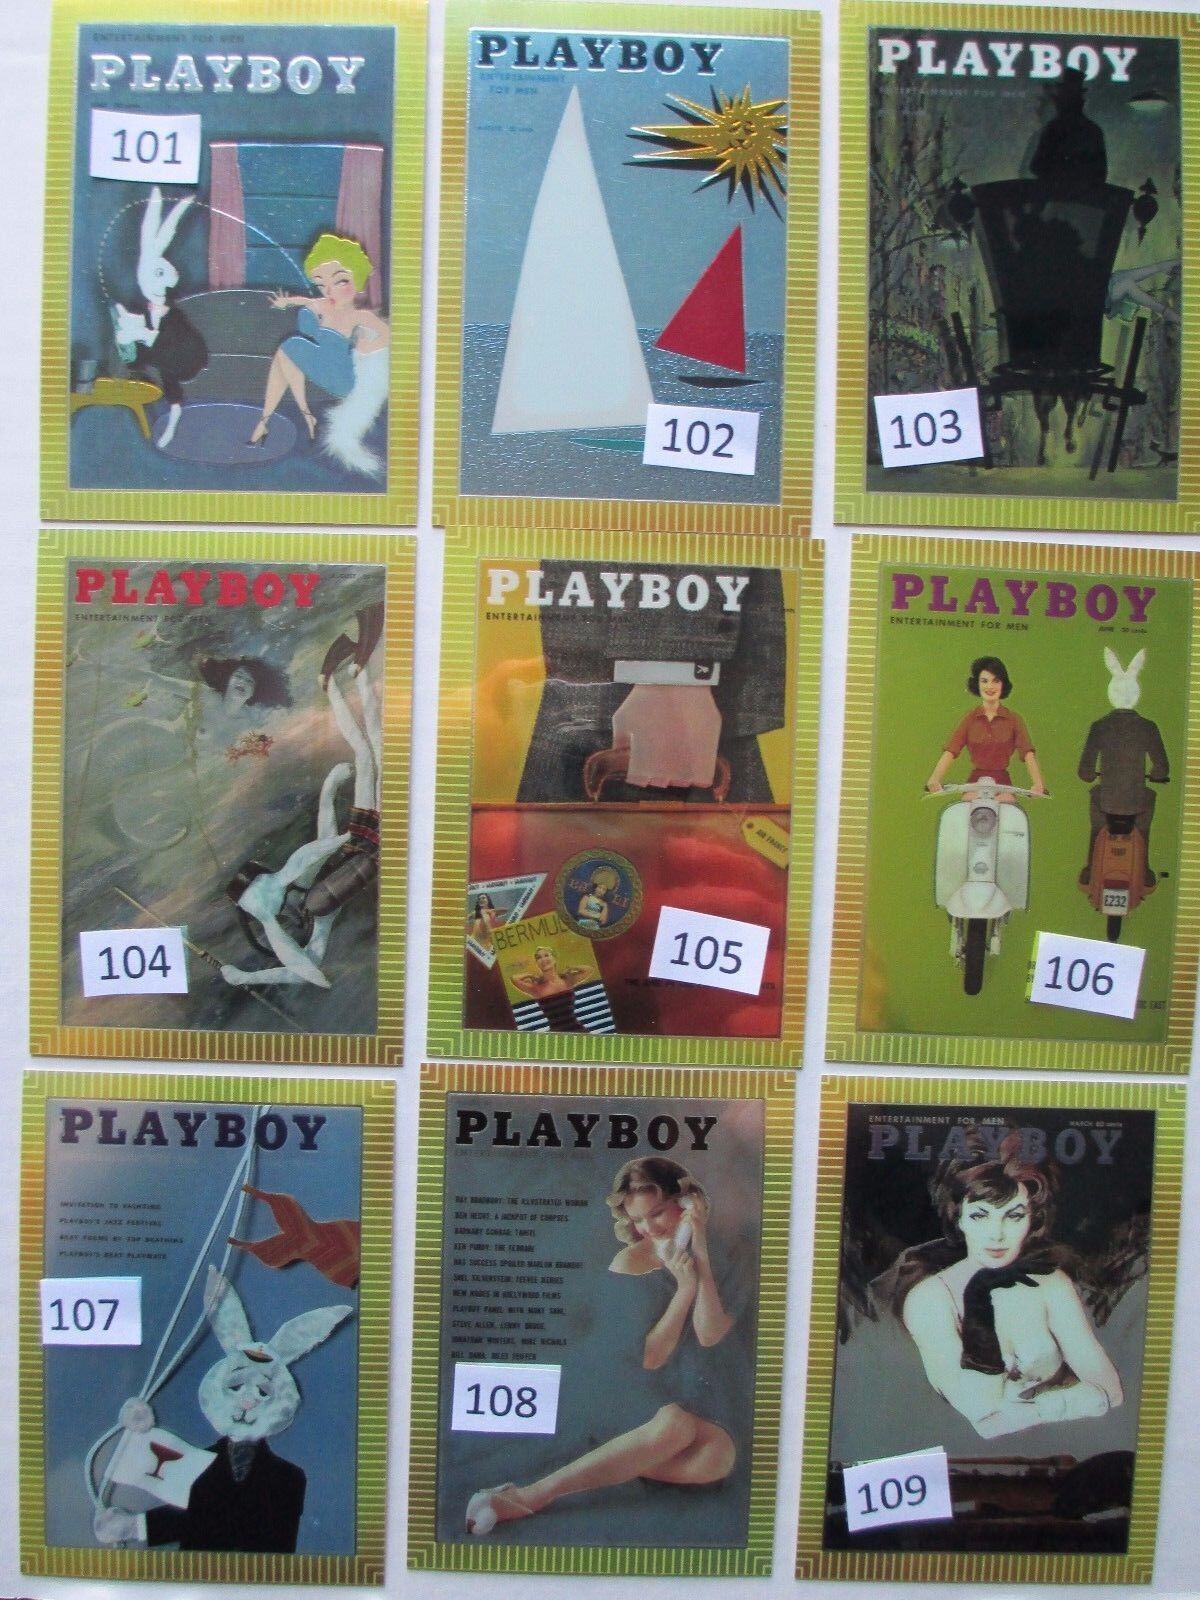 Playboy Chromium Cards 2  U Pick the card # Listed and Quantities $1.29 EACH